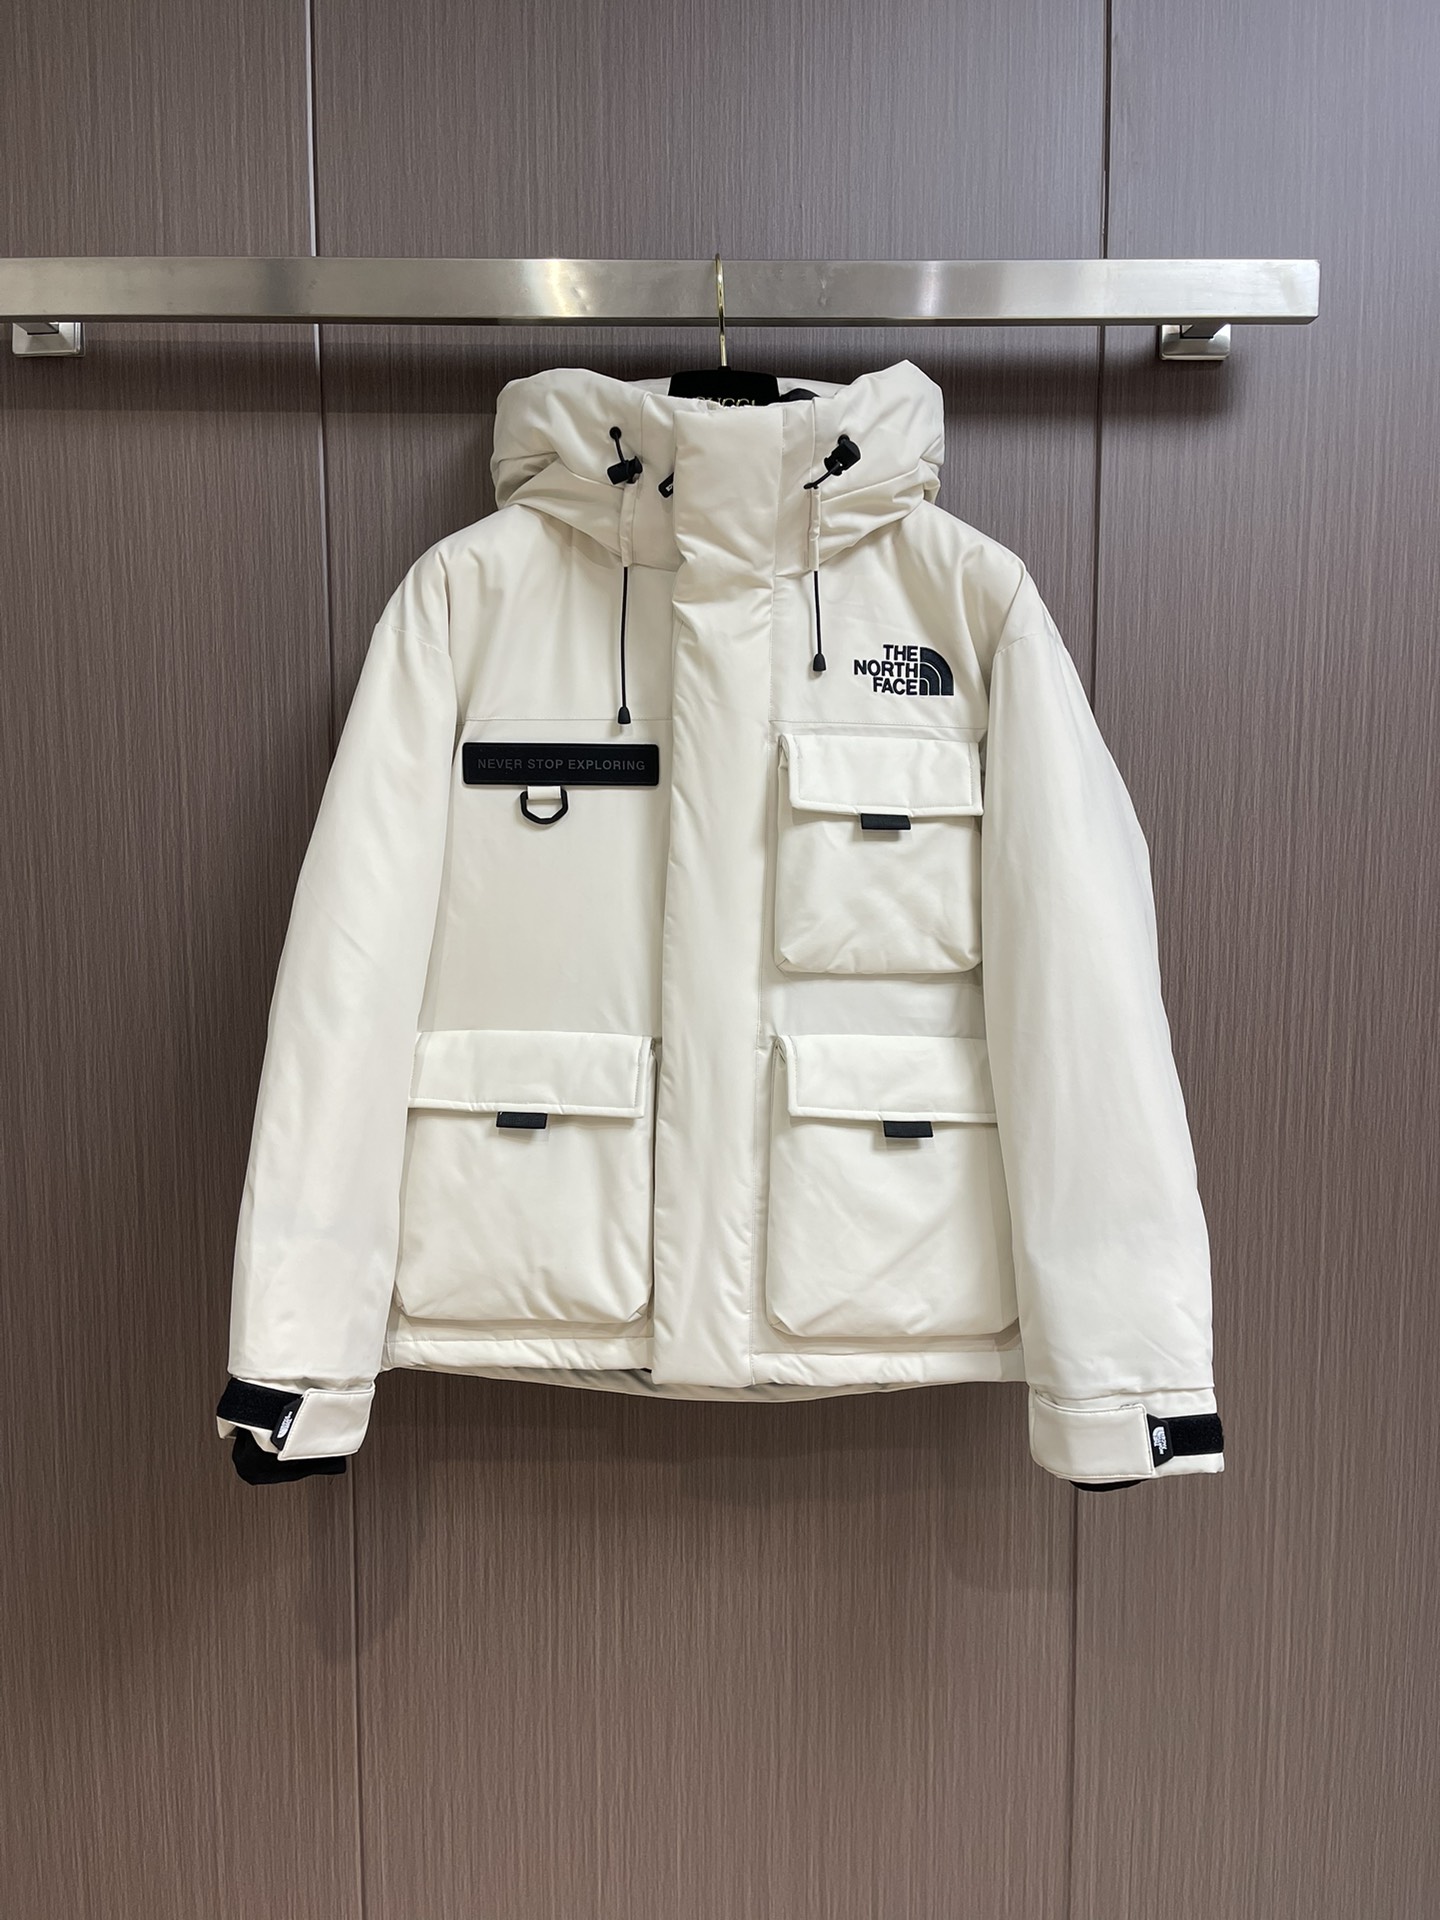 7 Star Quality Designer Replica
 The North Face Clothing Down Jacket Winter Collection Hooded Top